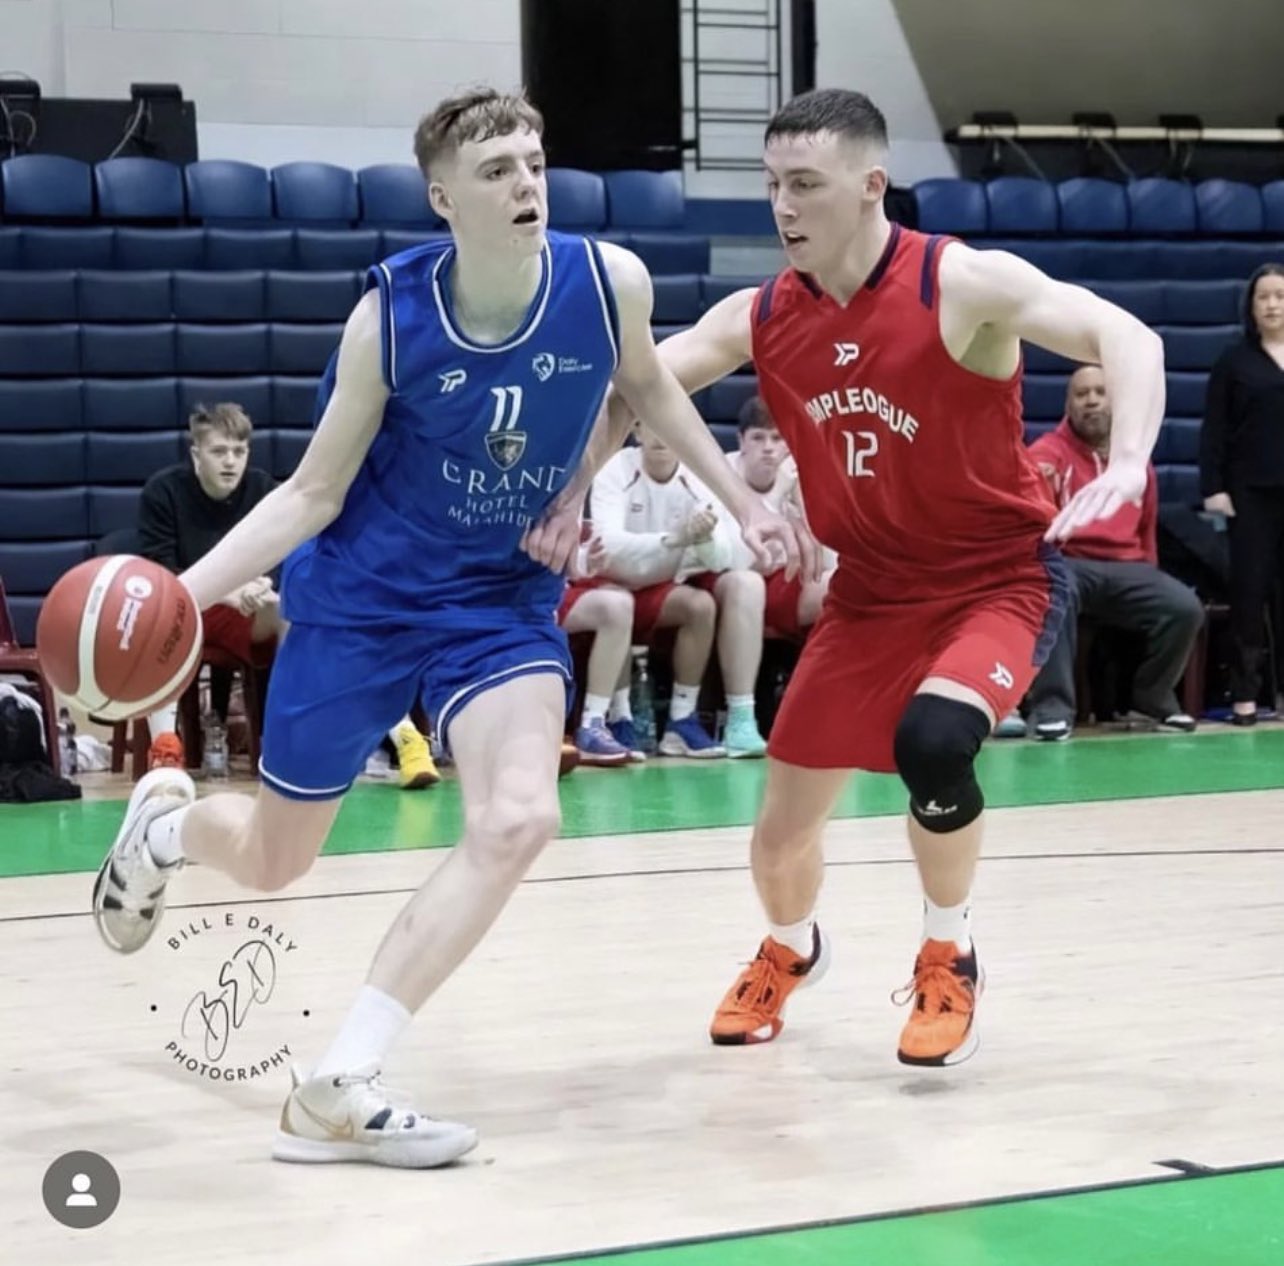 Basketball player in blue running past player in red whilst bouncing a basketball.